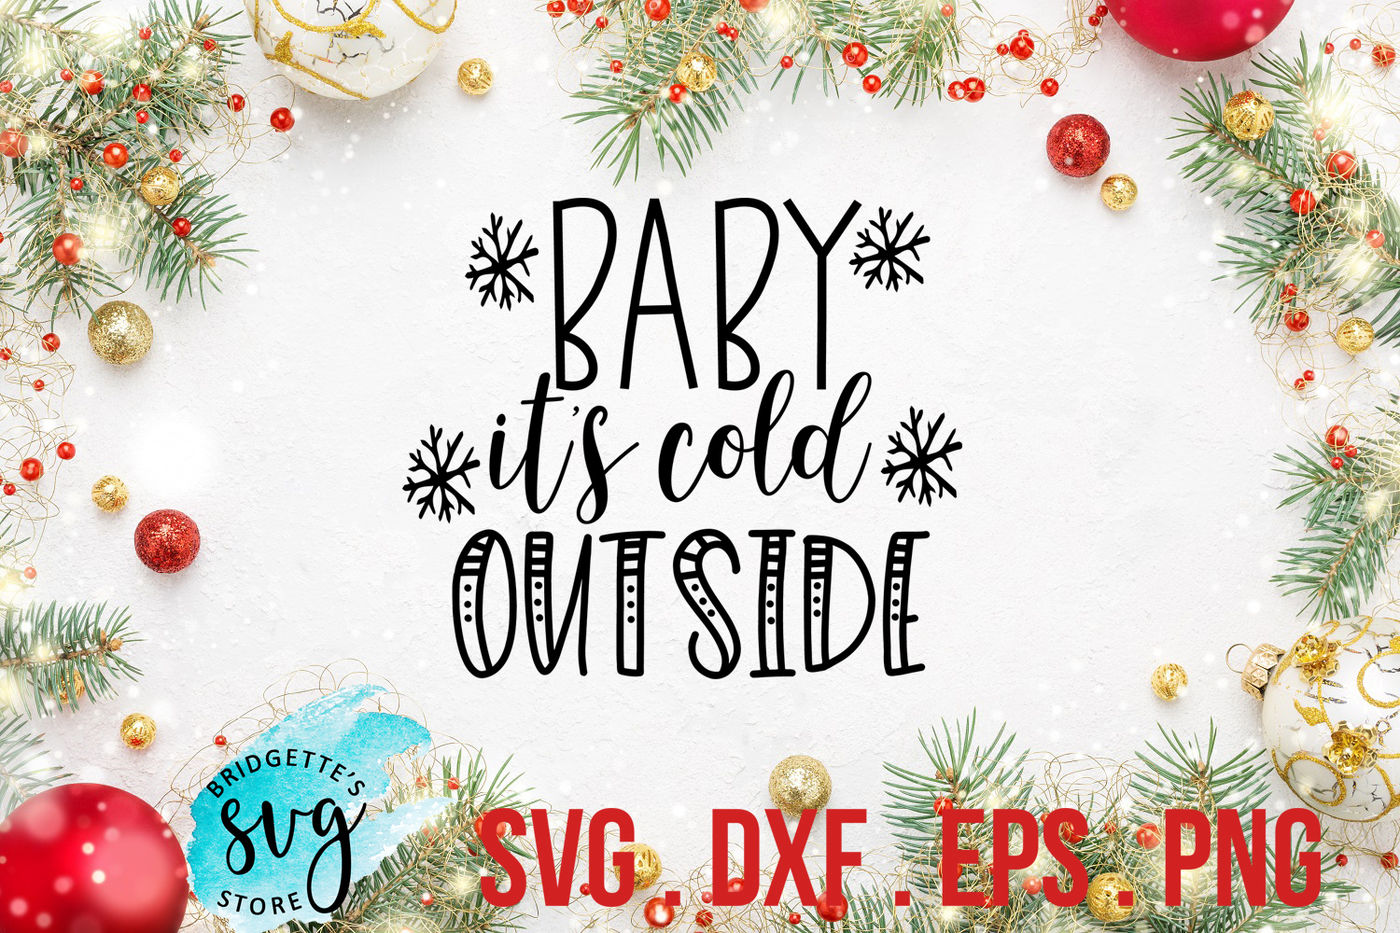 Baby It S Cold Outside Svg Dxf Png Eps File By Bridgettes Svg Store Thehungryjpeg Com